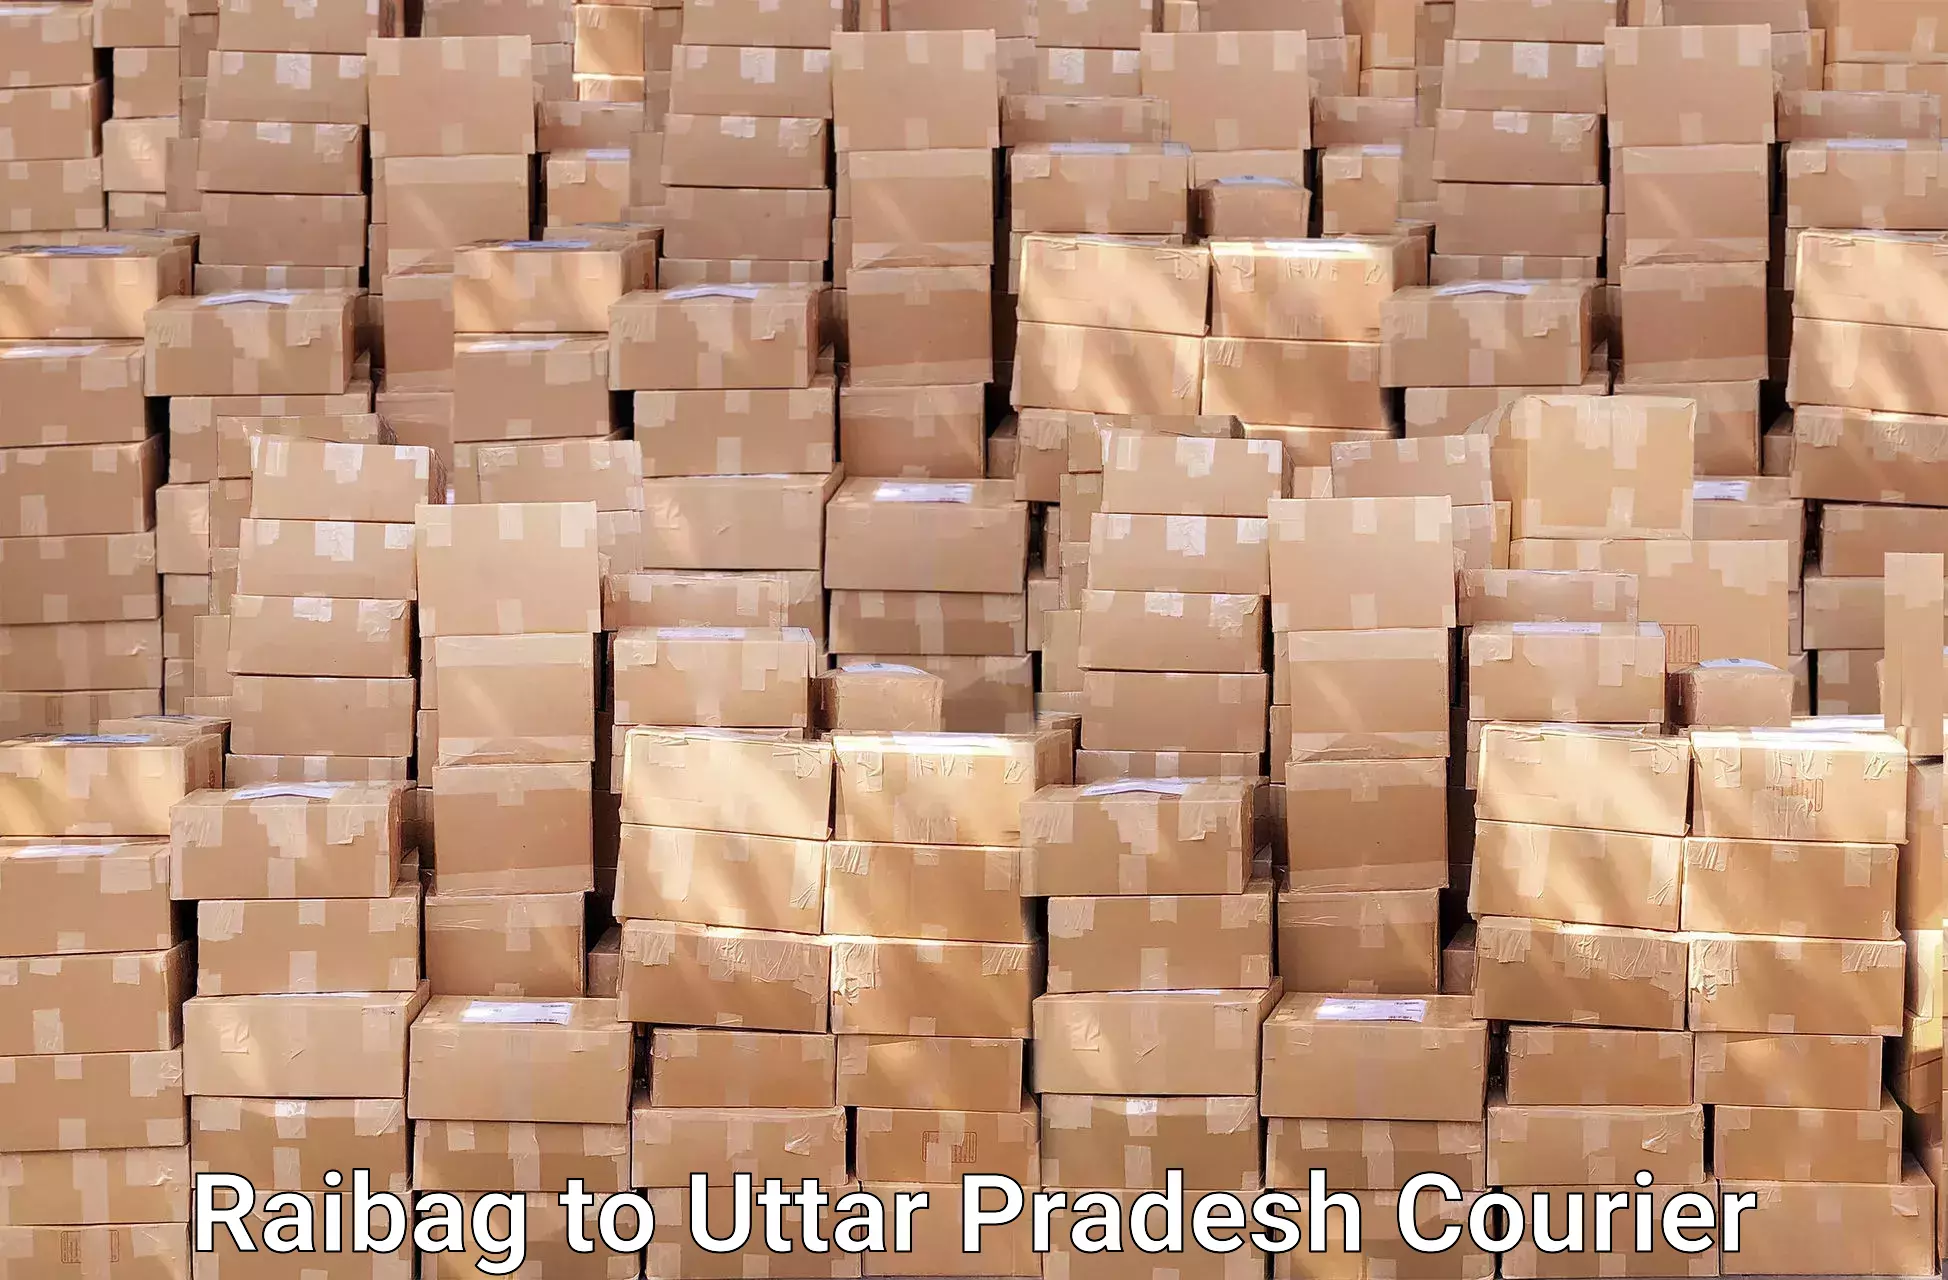 Professional movers and packers Raibag to Deoband